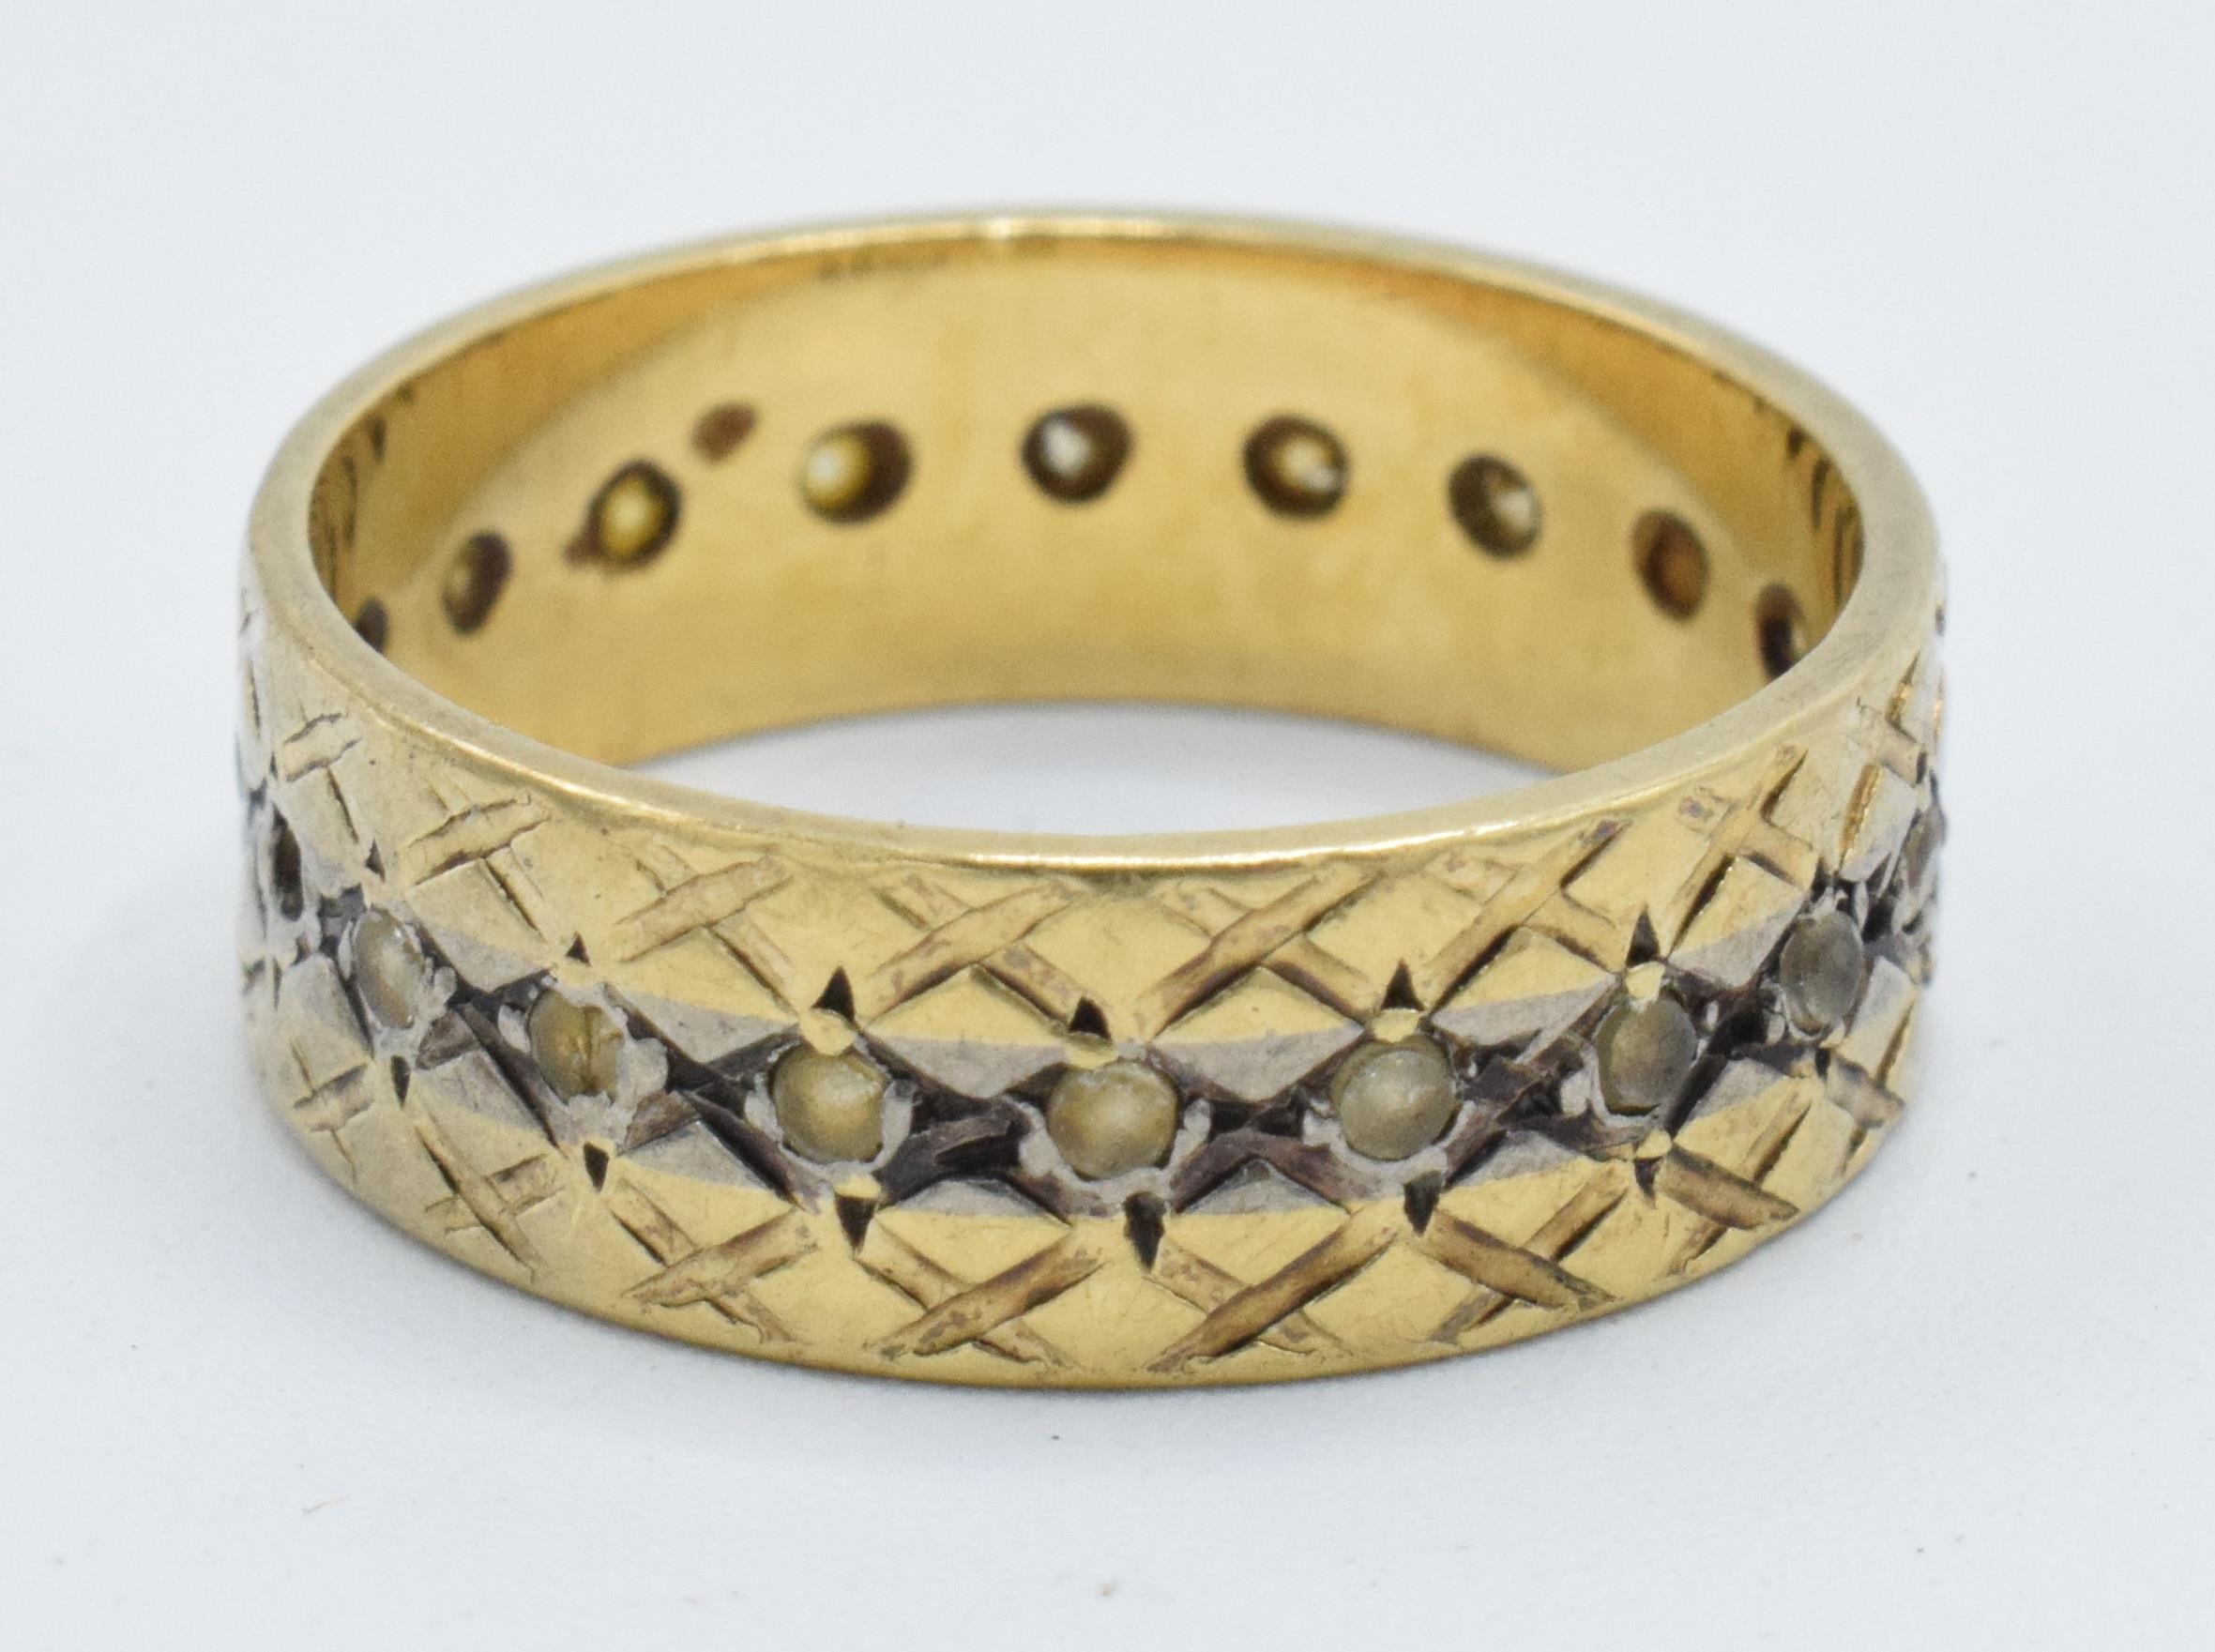 18ct gold eternity ring, 4.1 grams, size L (some stones missing).